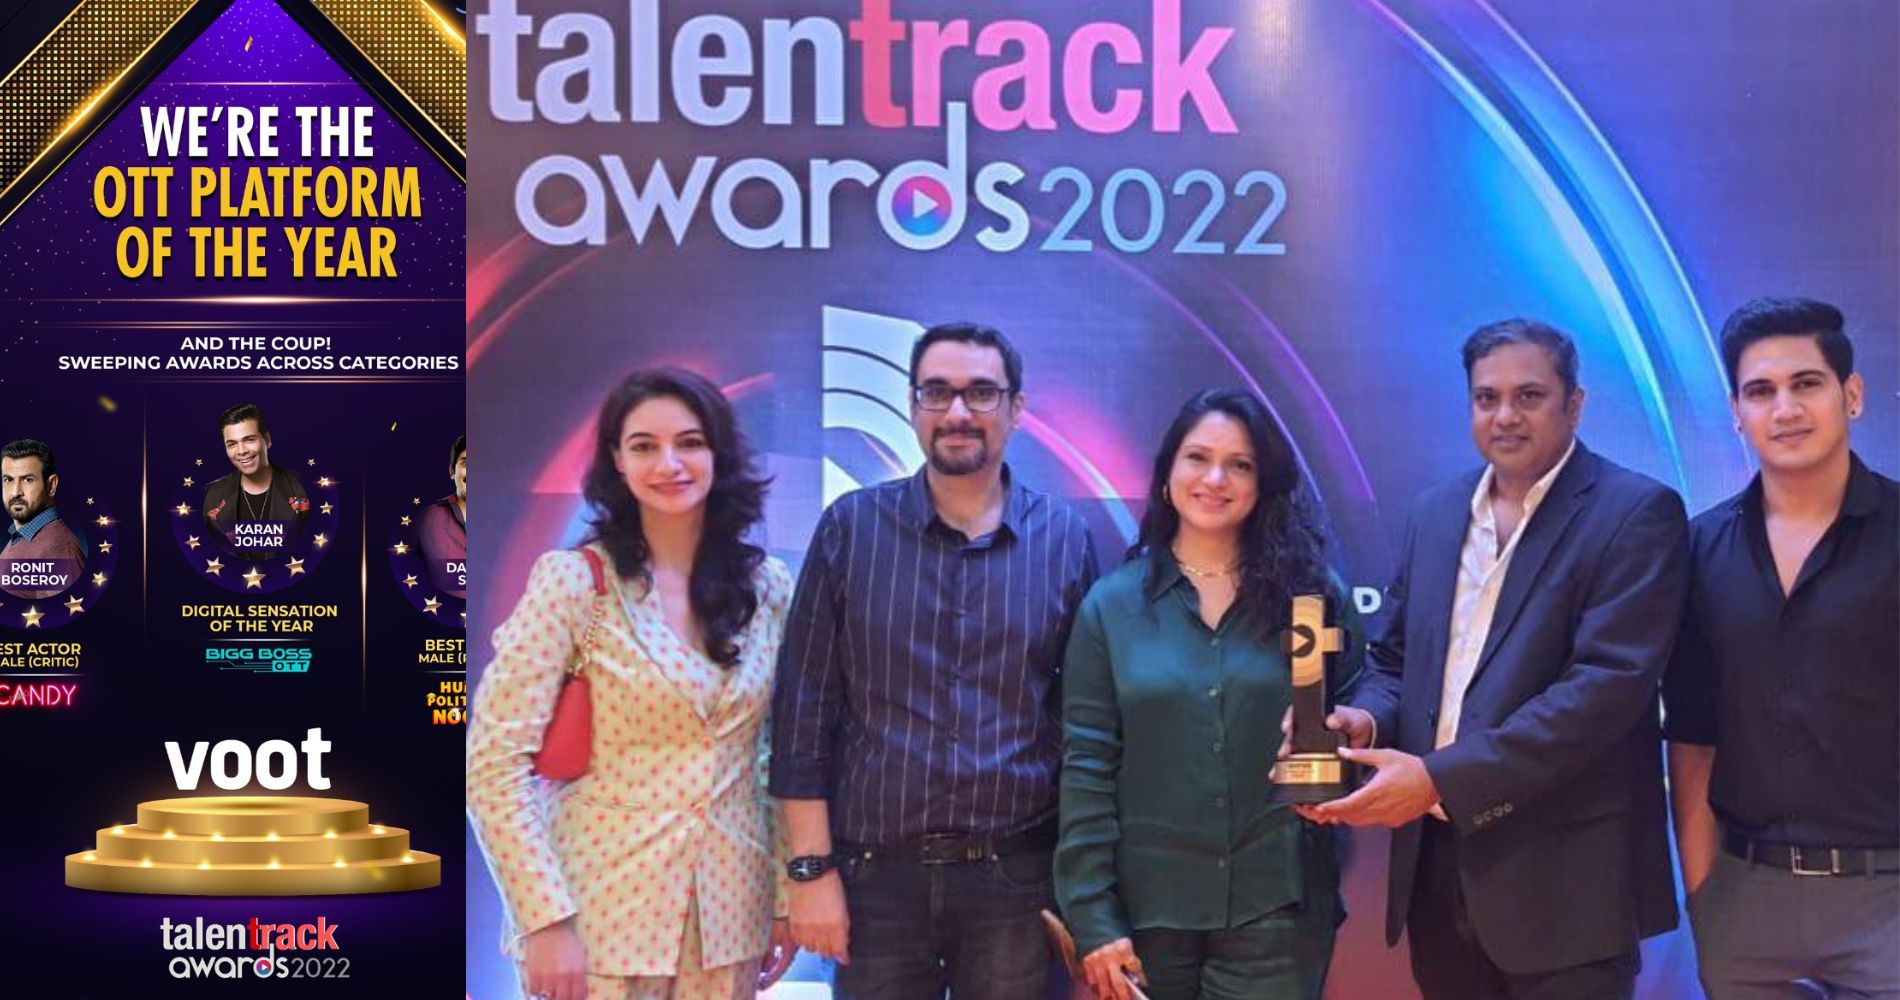 Voot wins big at Talent Track Awards; takes home ‘OTT Platform of the Year’